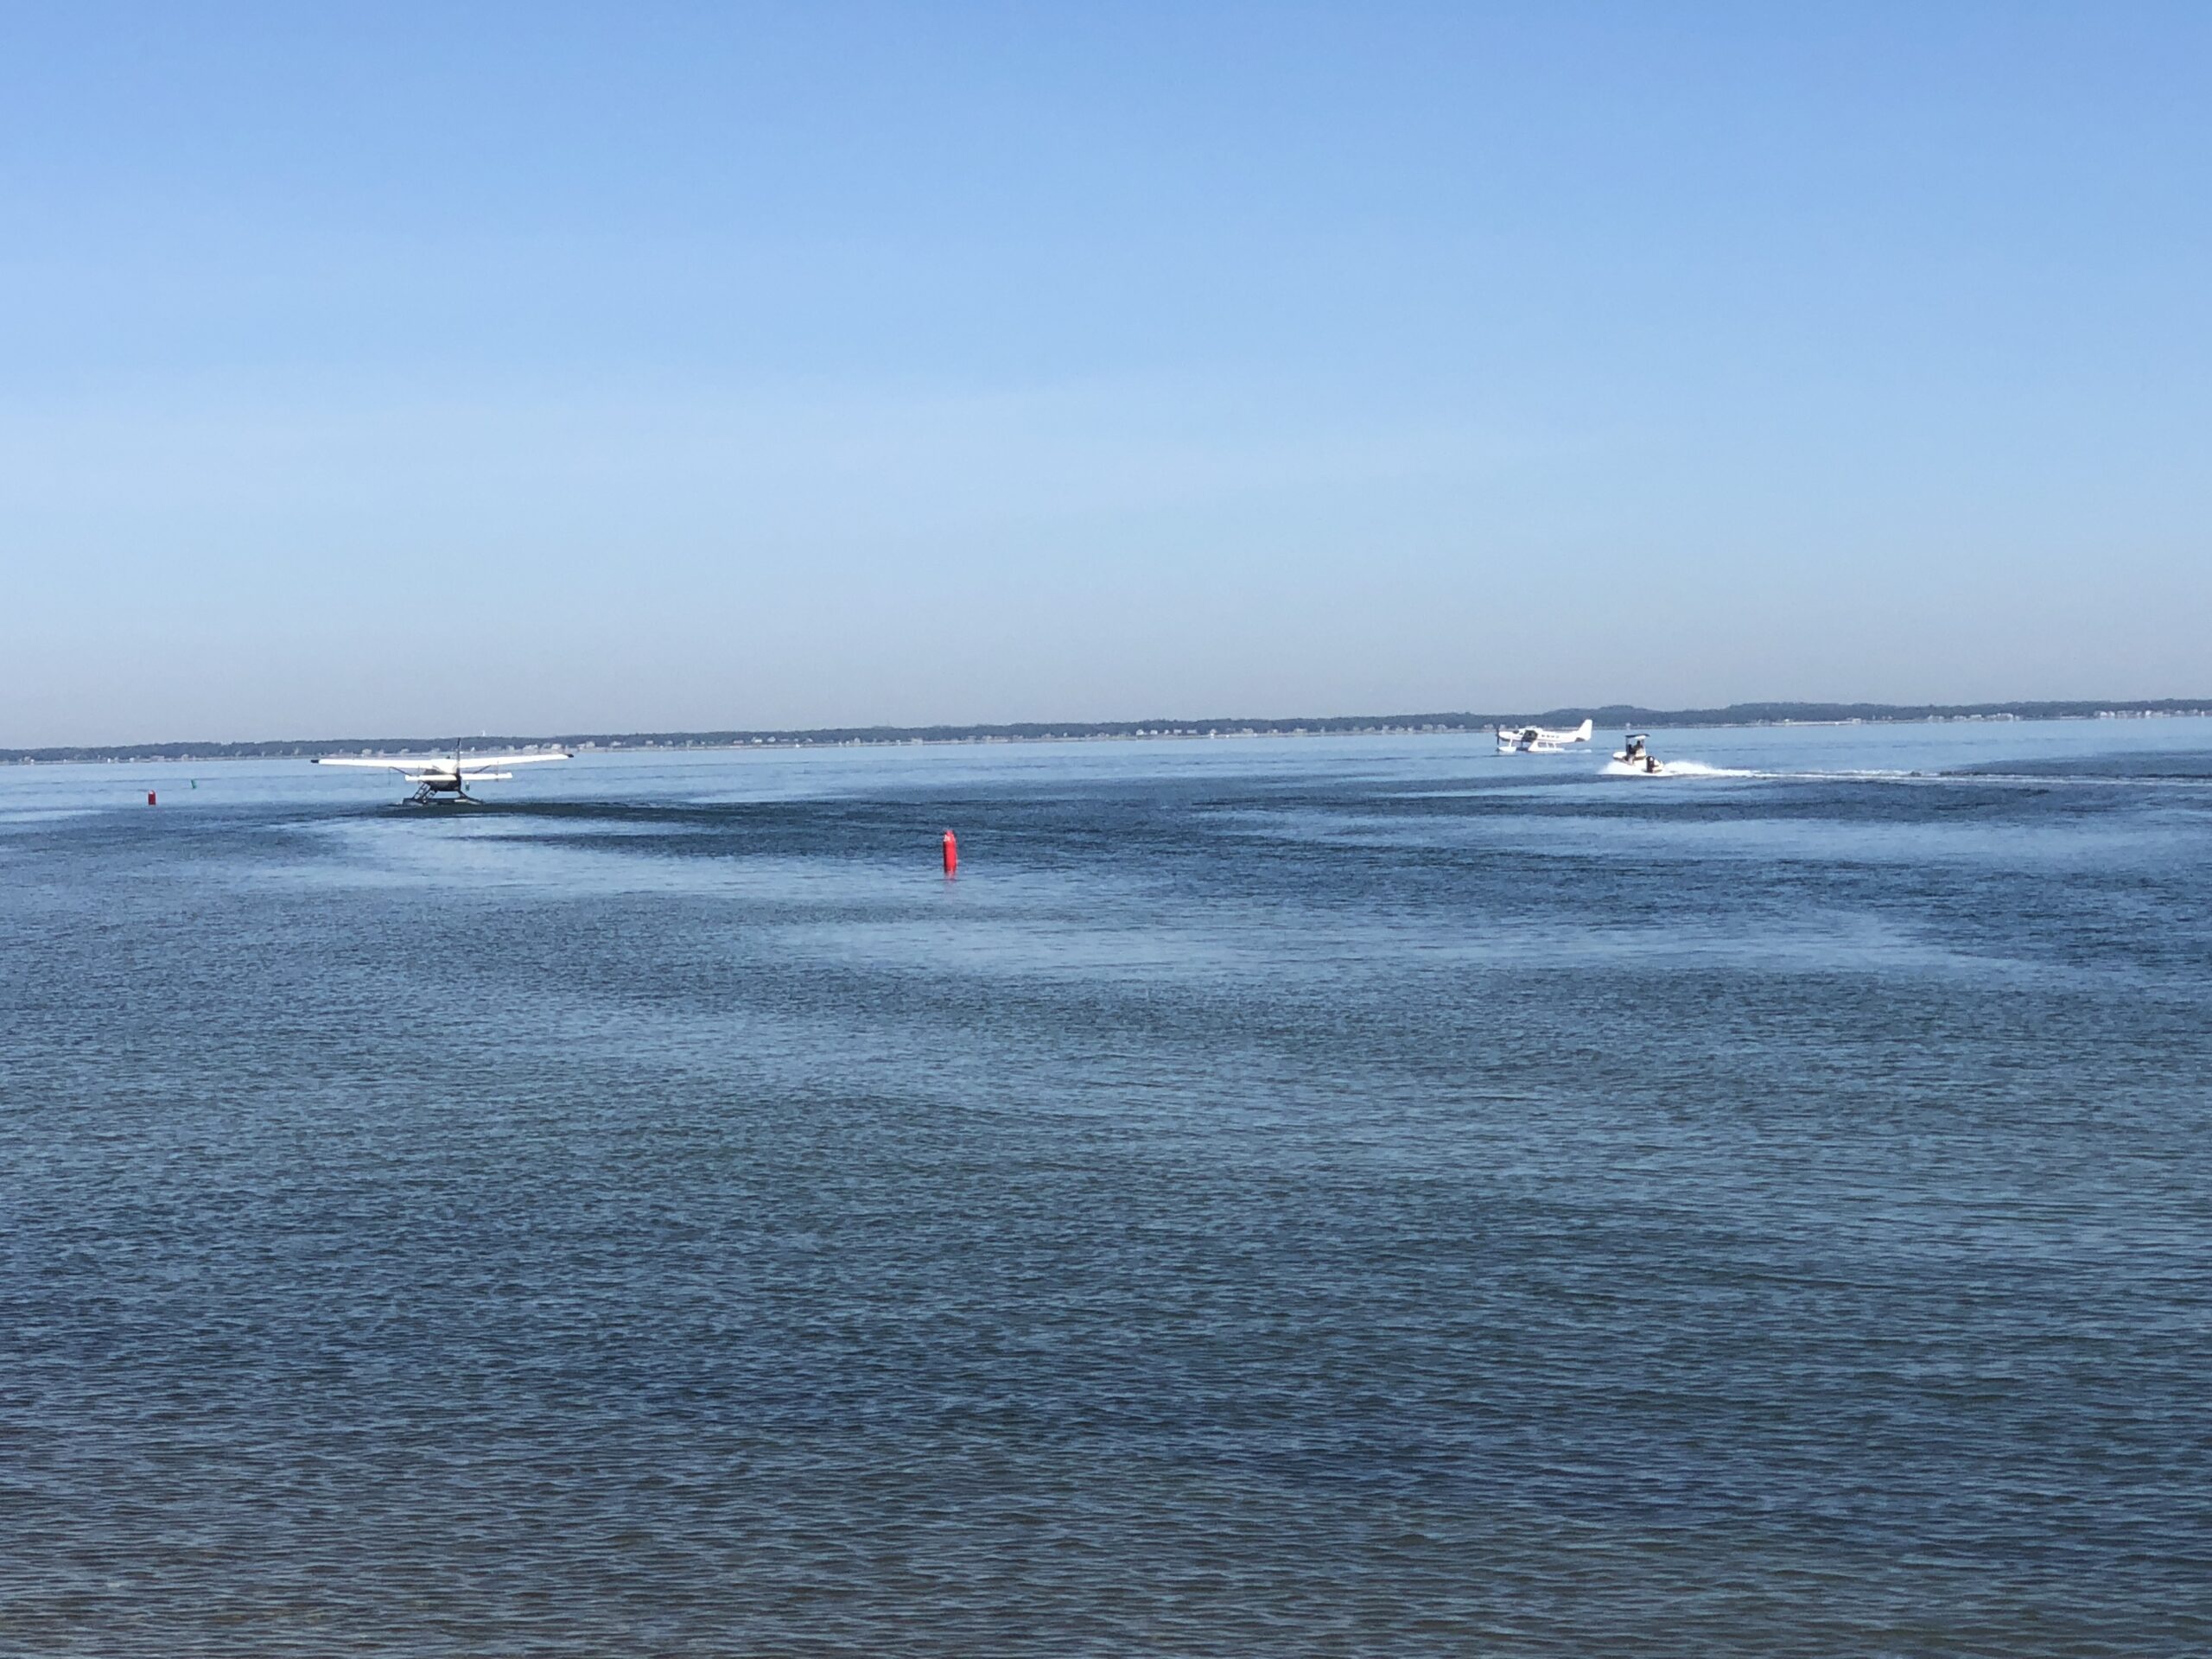 Seaplanes in bay off Sag Harbor. MICHAEL WRIGHT